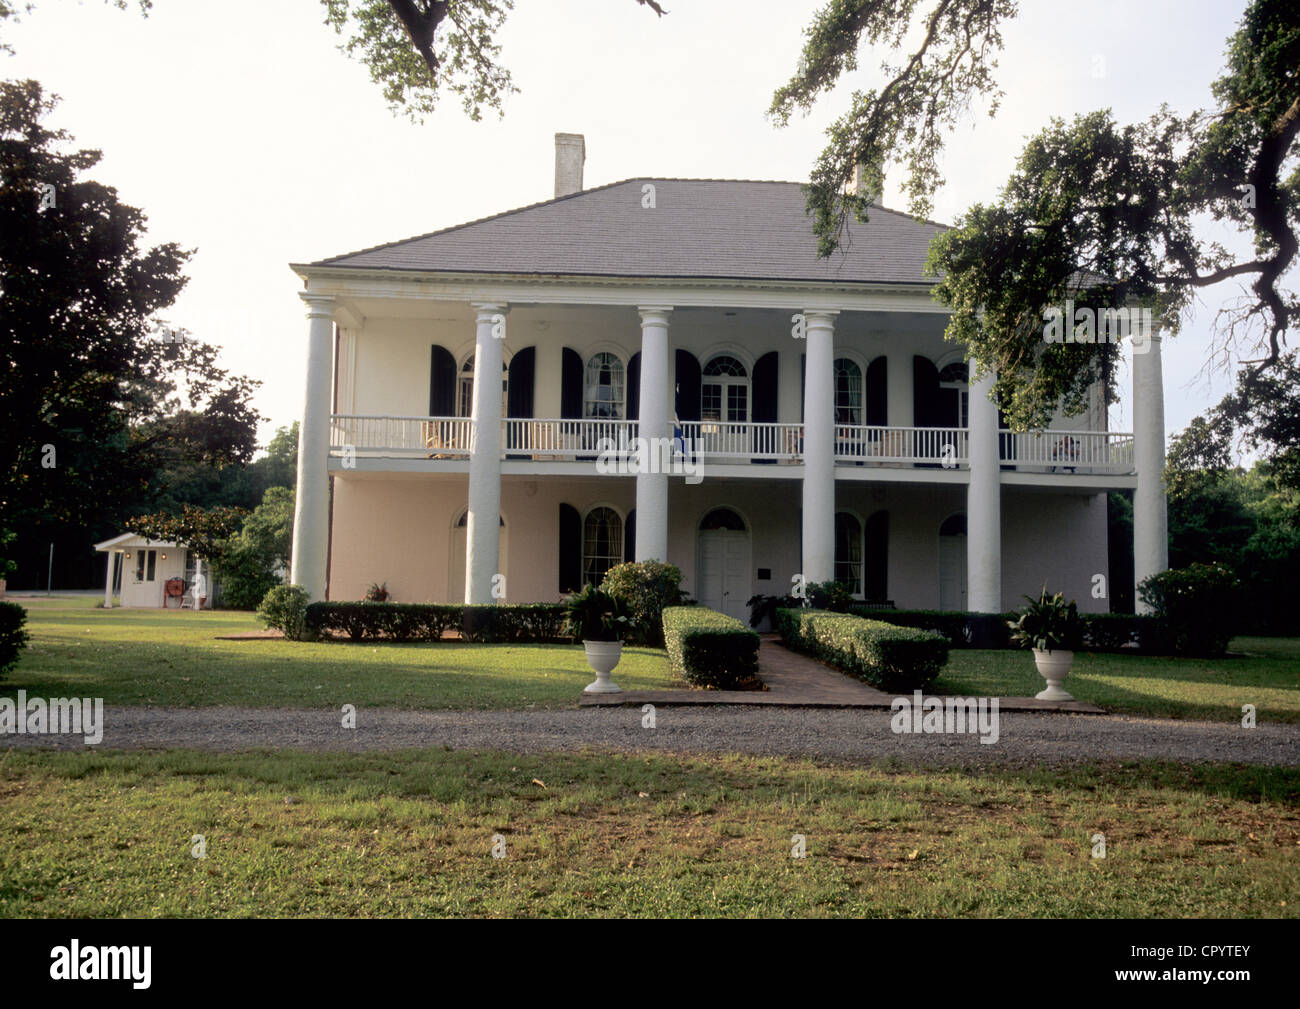 United States, Louisiana, Lafayette, Chretien Point Plantation (1831) on the Bayou Bourbeaux banks, Bed and Breakfast, its Stock Photo